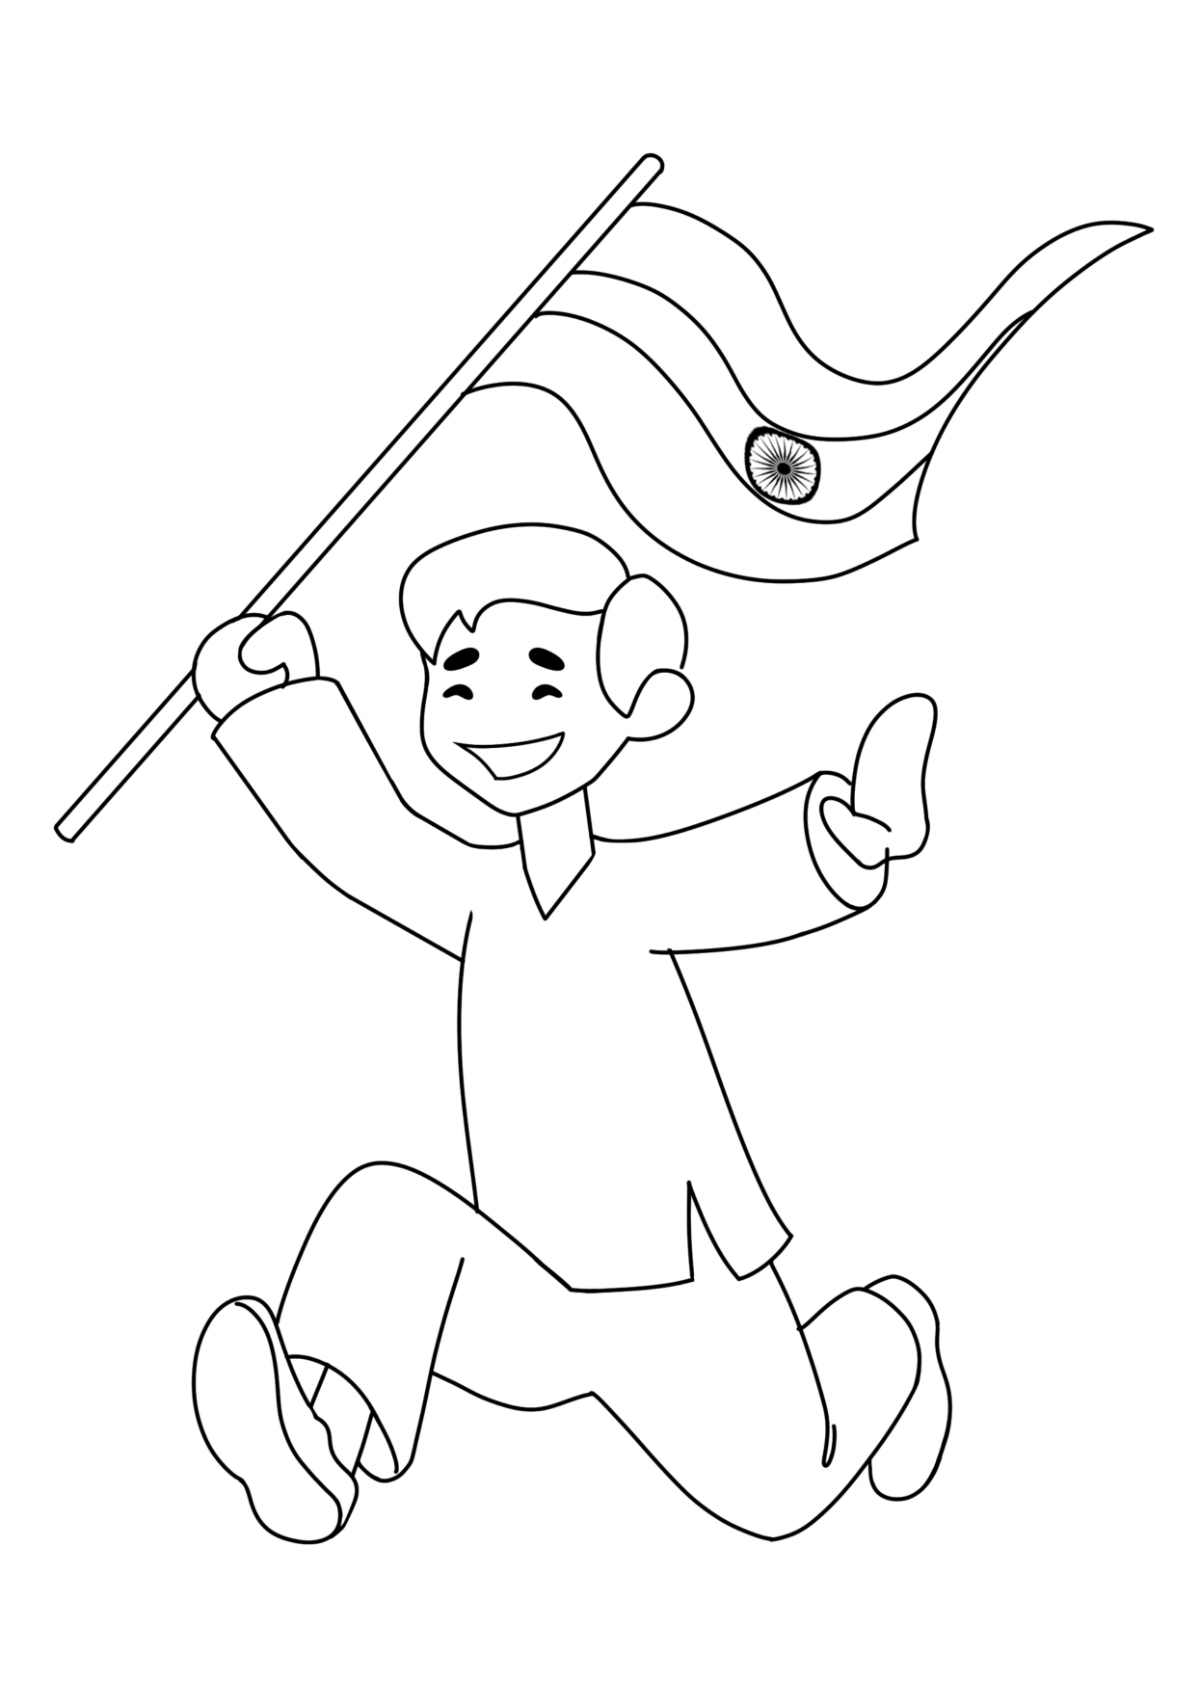 Kwanzaa Boy Holding a Flag Coloring Page - Stock Illustration [94930839] -  PIXTA